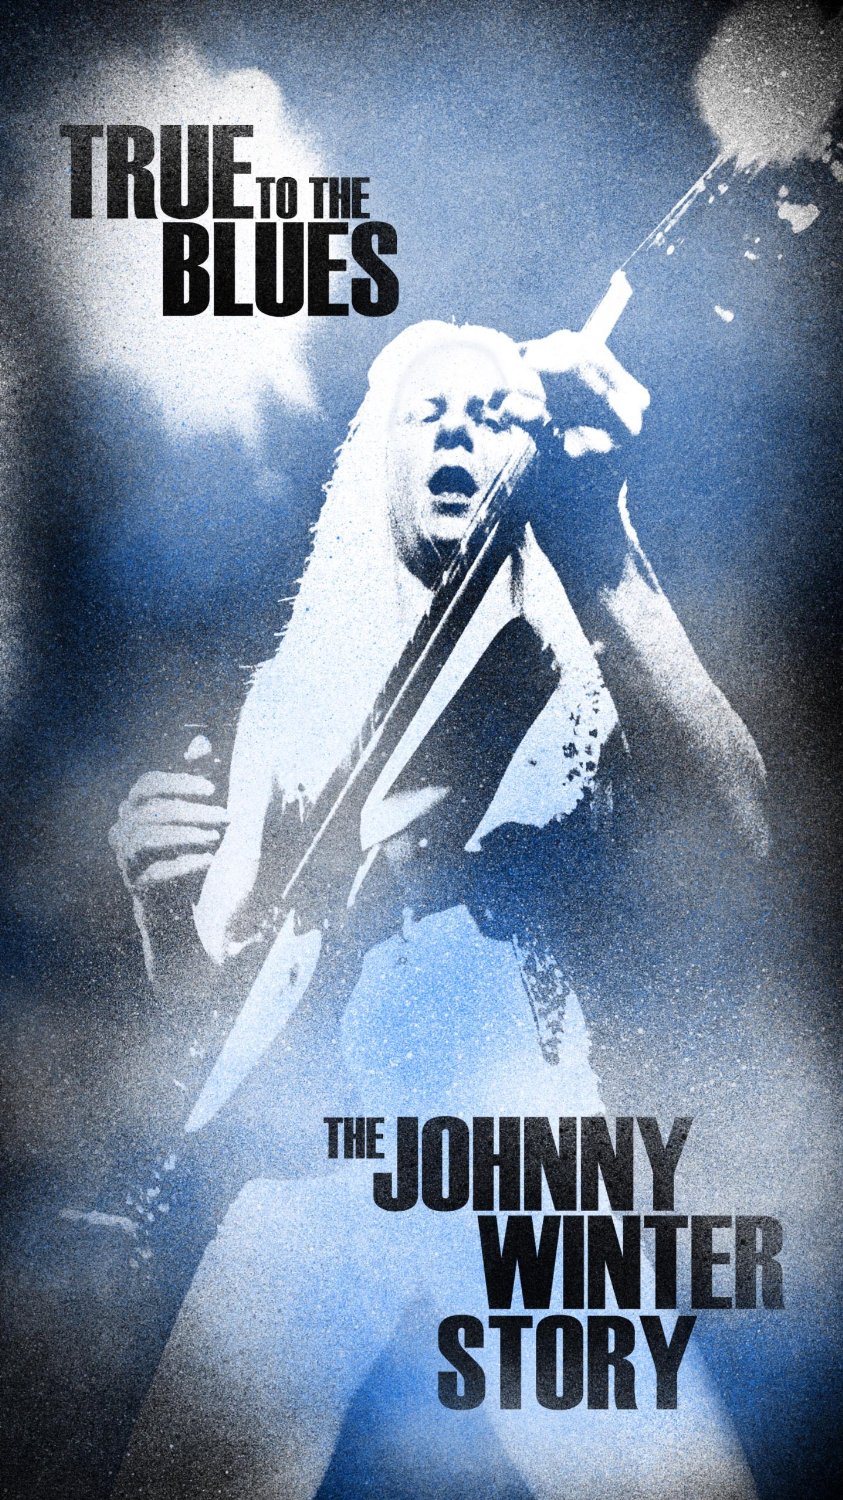 JOHNNY WINTER True To The Blues - The Johnny Winter Story